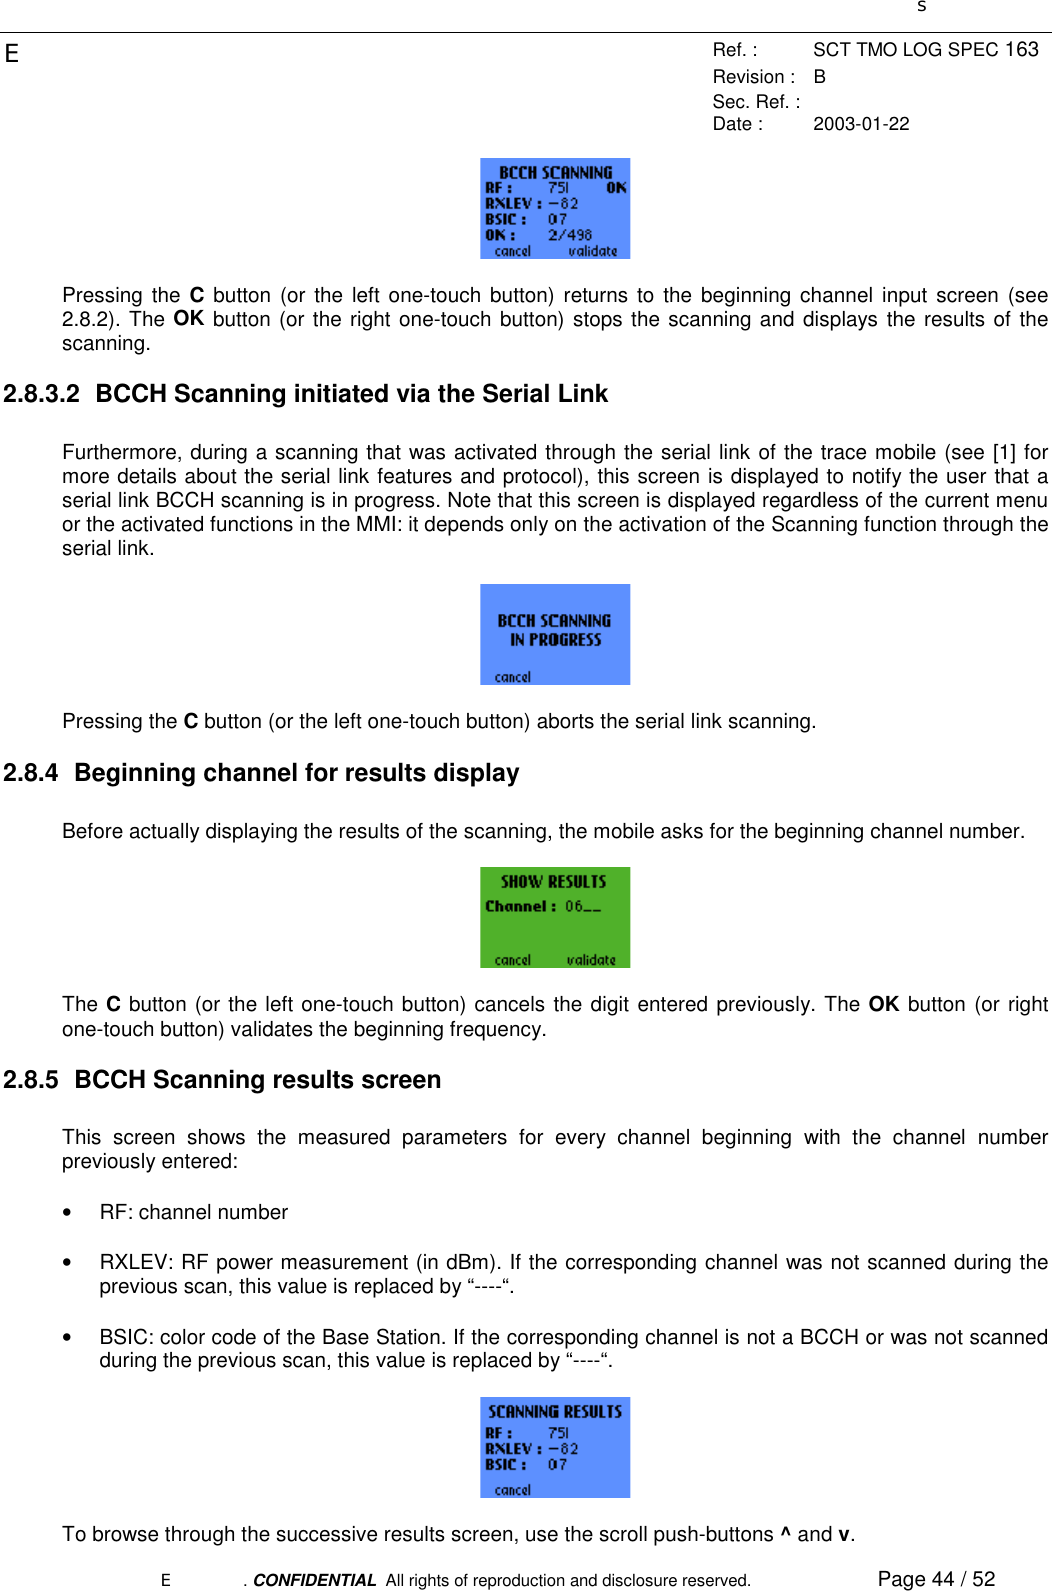 sERef. : SCT TMO LOG SPEC 163Revision : BSec. Ref. :Date : 2003-01-22E. CONFIDENTIAL  All rights of reproduction and disclosure reserved. Page 44 / 52Pressing the C button (or the left one-touch button) returns to the beginning channel input screen (see2.8.2). The OK button (or the right one-touch button) stops the scanning and displays the results of thescanning.2.8.3.2  BCCH Scanning initiated via the Serial LinkFurthermore, during a scanning that was activated through the serial link of the trace mobile (see [1] formore details about the serial link features and protocol), this screen is displayed to notify the user that aserial link BCCH scanning is in progress. Note that this screen is displayed regardless of the current menuor the activated functions in the MMI: it depends only on the activation of the Scanning function through theserial link.Pressing the C button (or the left one-touch button) aborts the serial link scanning.2.8.4  Beginning channel for results displayBefore actually displaying the results of the scanning, the mobile asks for the beginning channel number.The C button (or the left one-touch button) cancels the digit entered previously. The OK button (or rightone-touch button) validates the beginning frequency.2.8.5  BCCH Scanning results screenThis screen shows the measured parameters for every channel beginning with the channel numberpreviously entered:• RF: channel number•  RXLEV: RF power measurement (in dBm). If the corresponding channel was not scanned during theprevious scan, this value is replaced by “----“.•  BSIC: color code of the Base Station. If the corresponding channel is not a BCCH or was not scannedduring the previous scan, this value is replaced by “----“.To browse through the successive results screen, use the scroll push-buttons ^ and v.